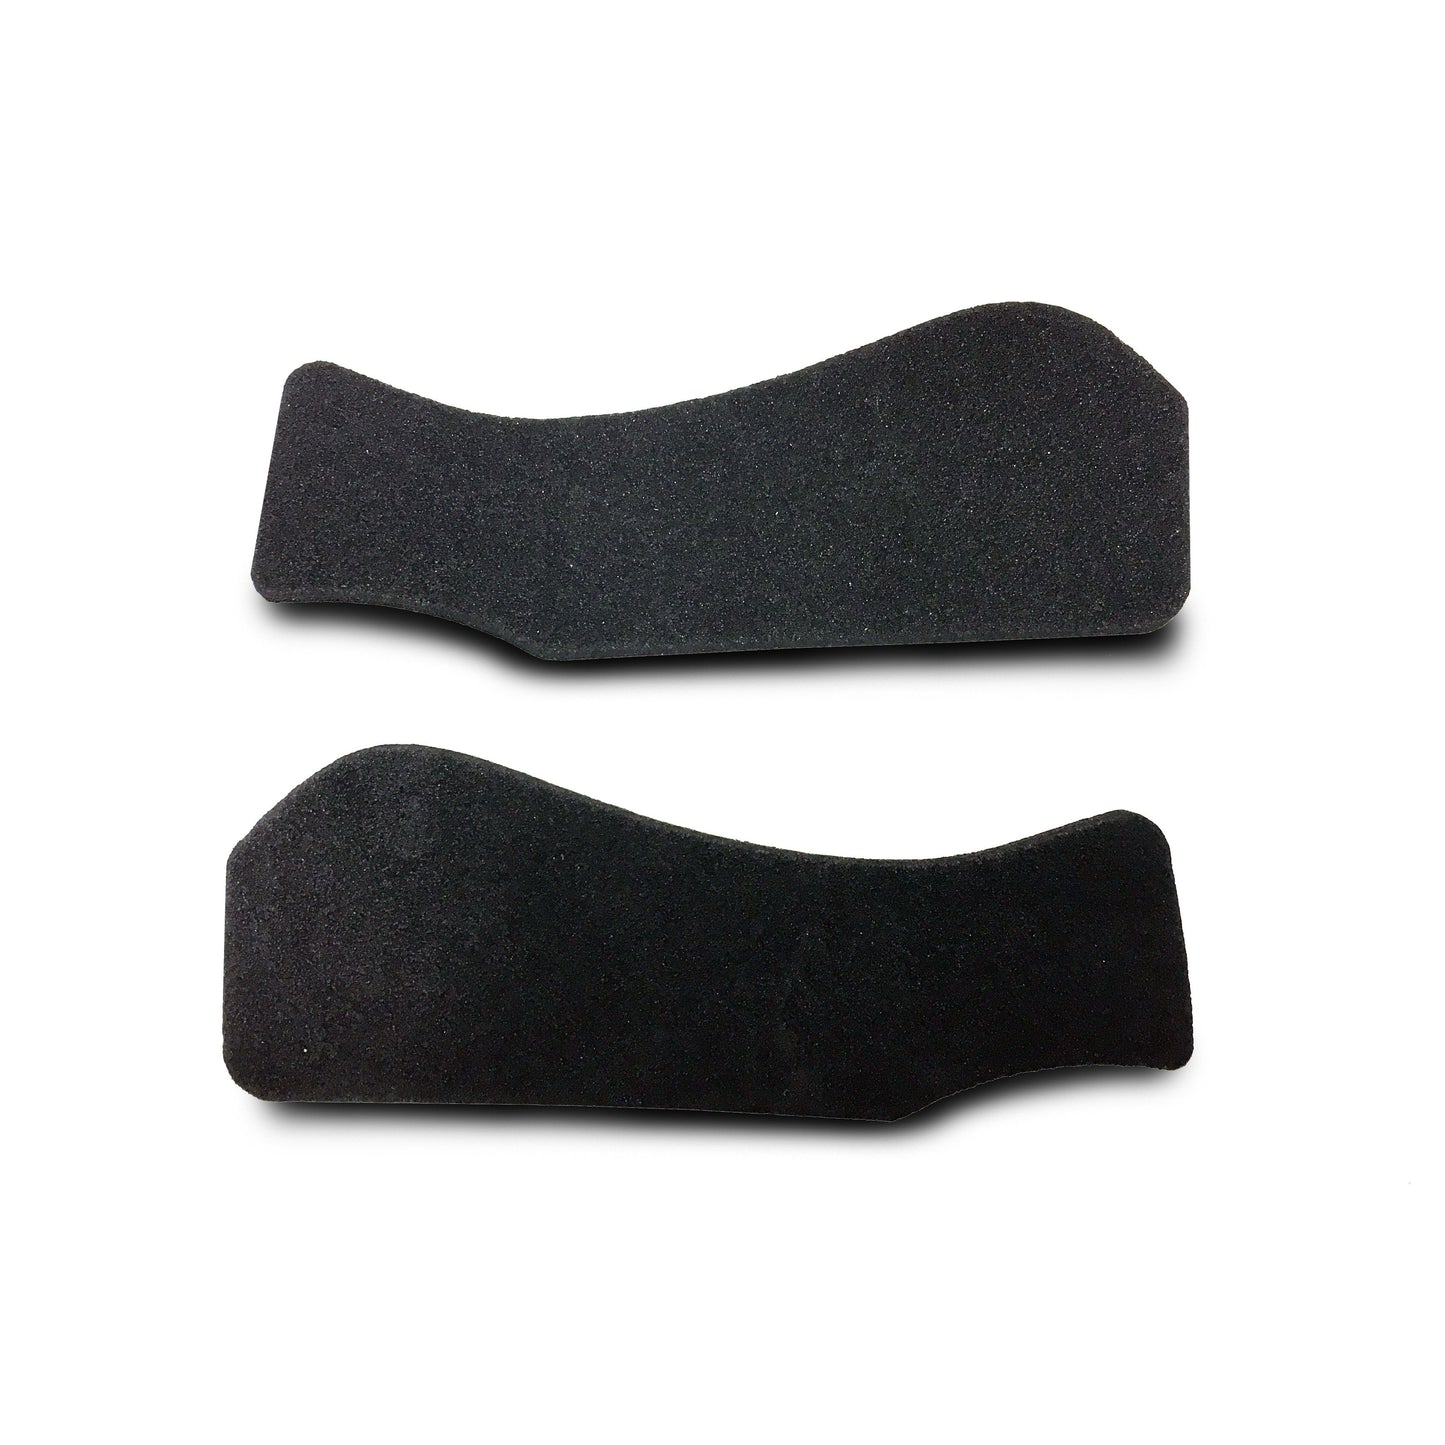 Two black KASK horse riding helmet padding pieces on white background.